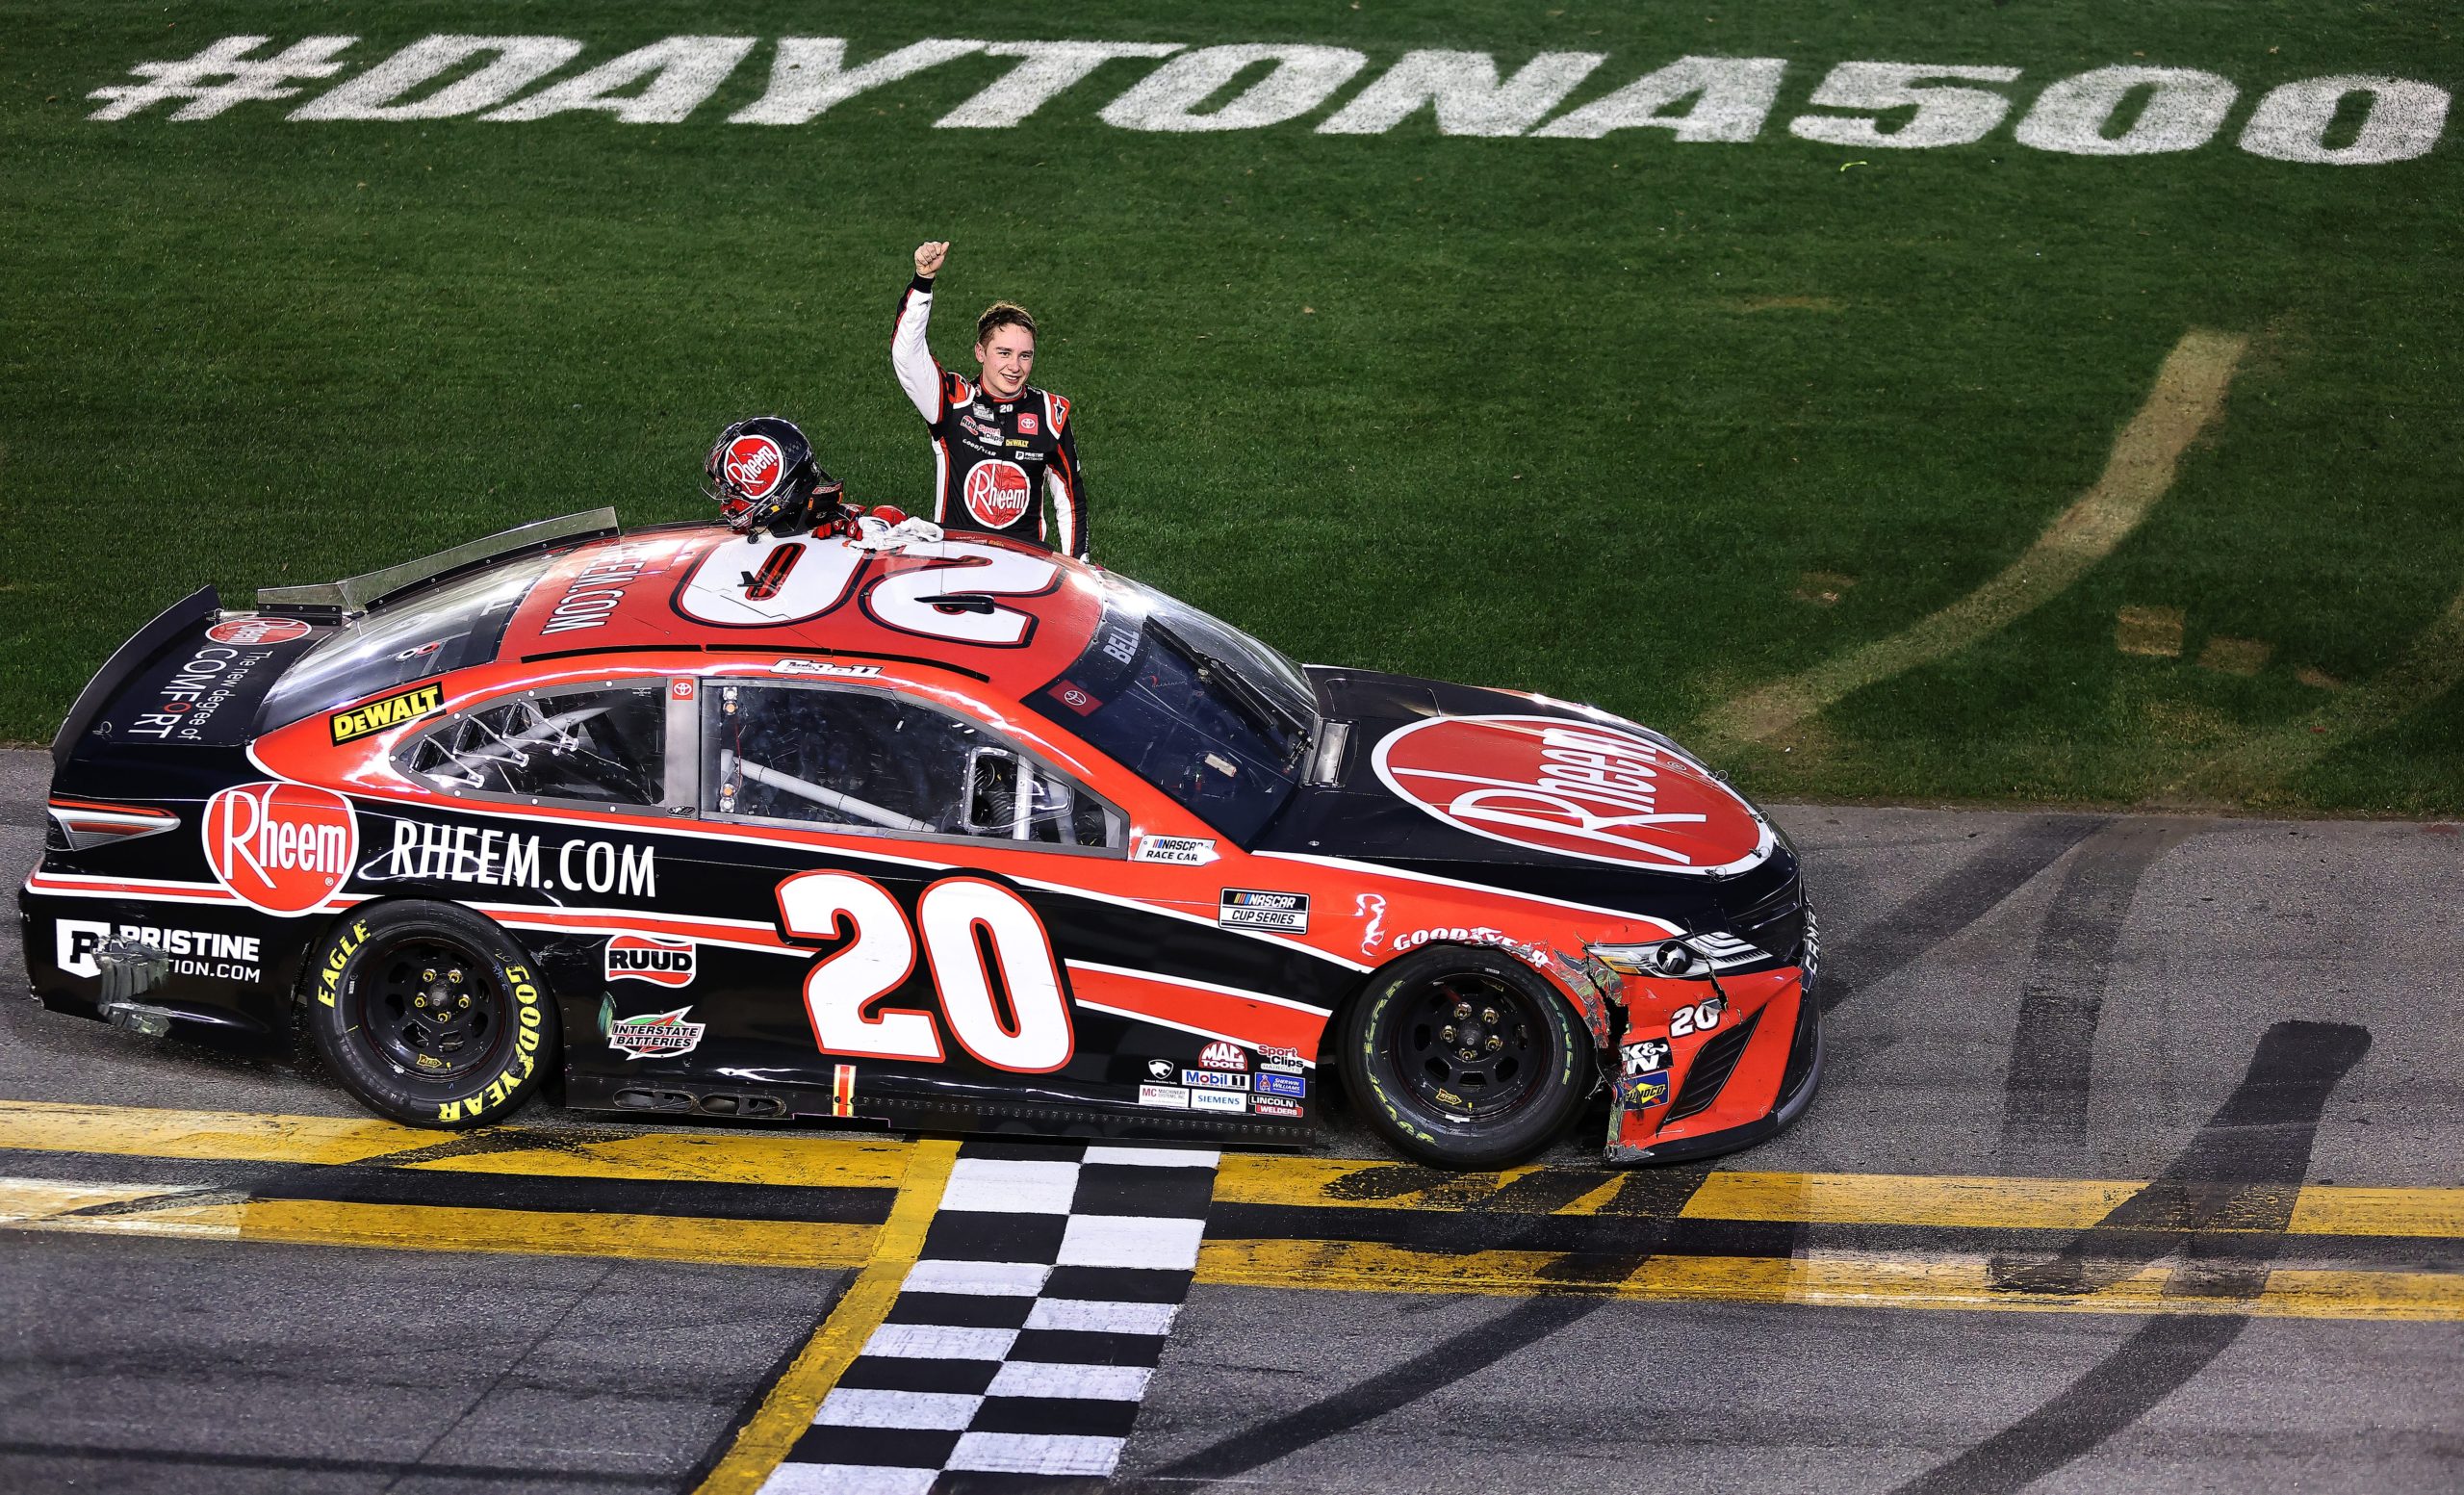 Christopher Bell Earns First Cup Win on Daytona RC